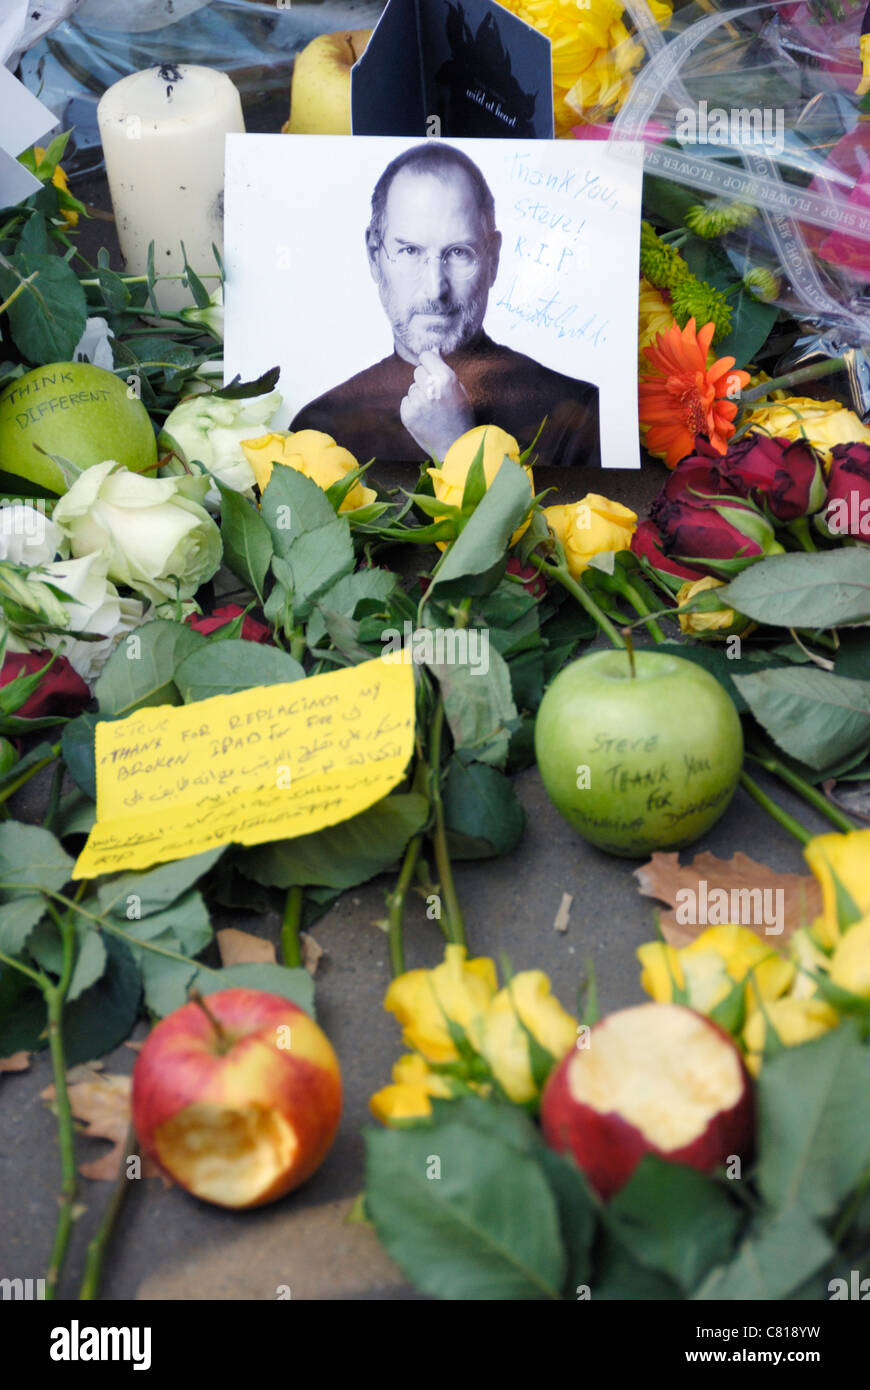 Public tributes to Steve Jobs left outside the Apple Store in Regents Street, London, England Stock Photo